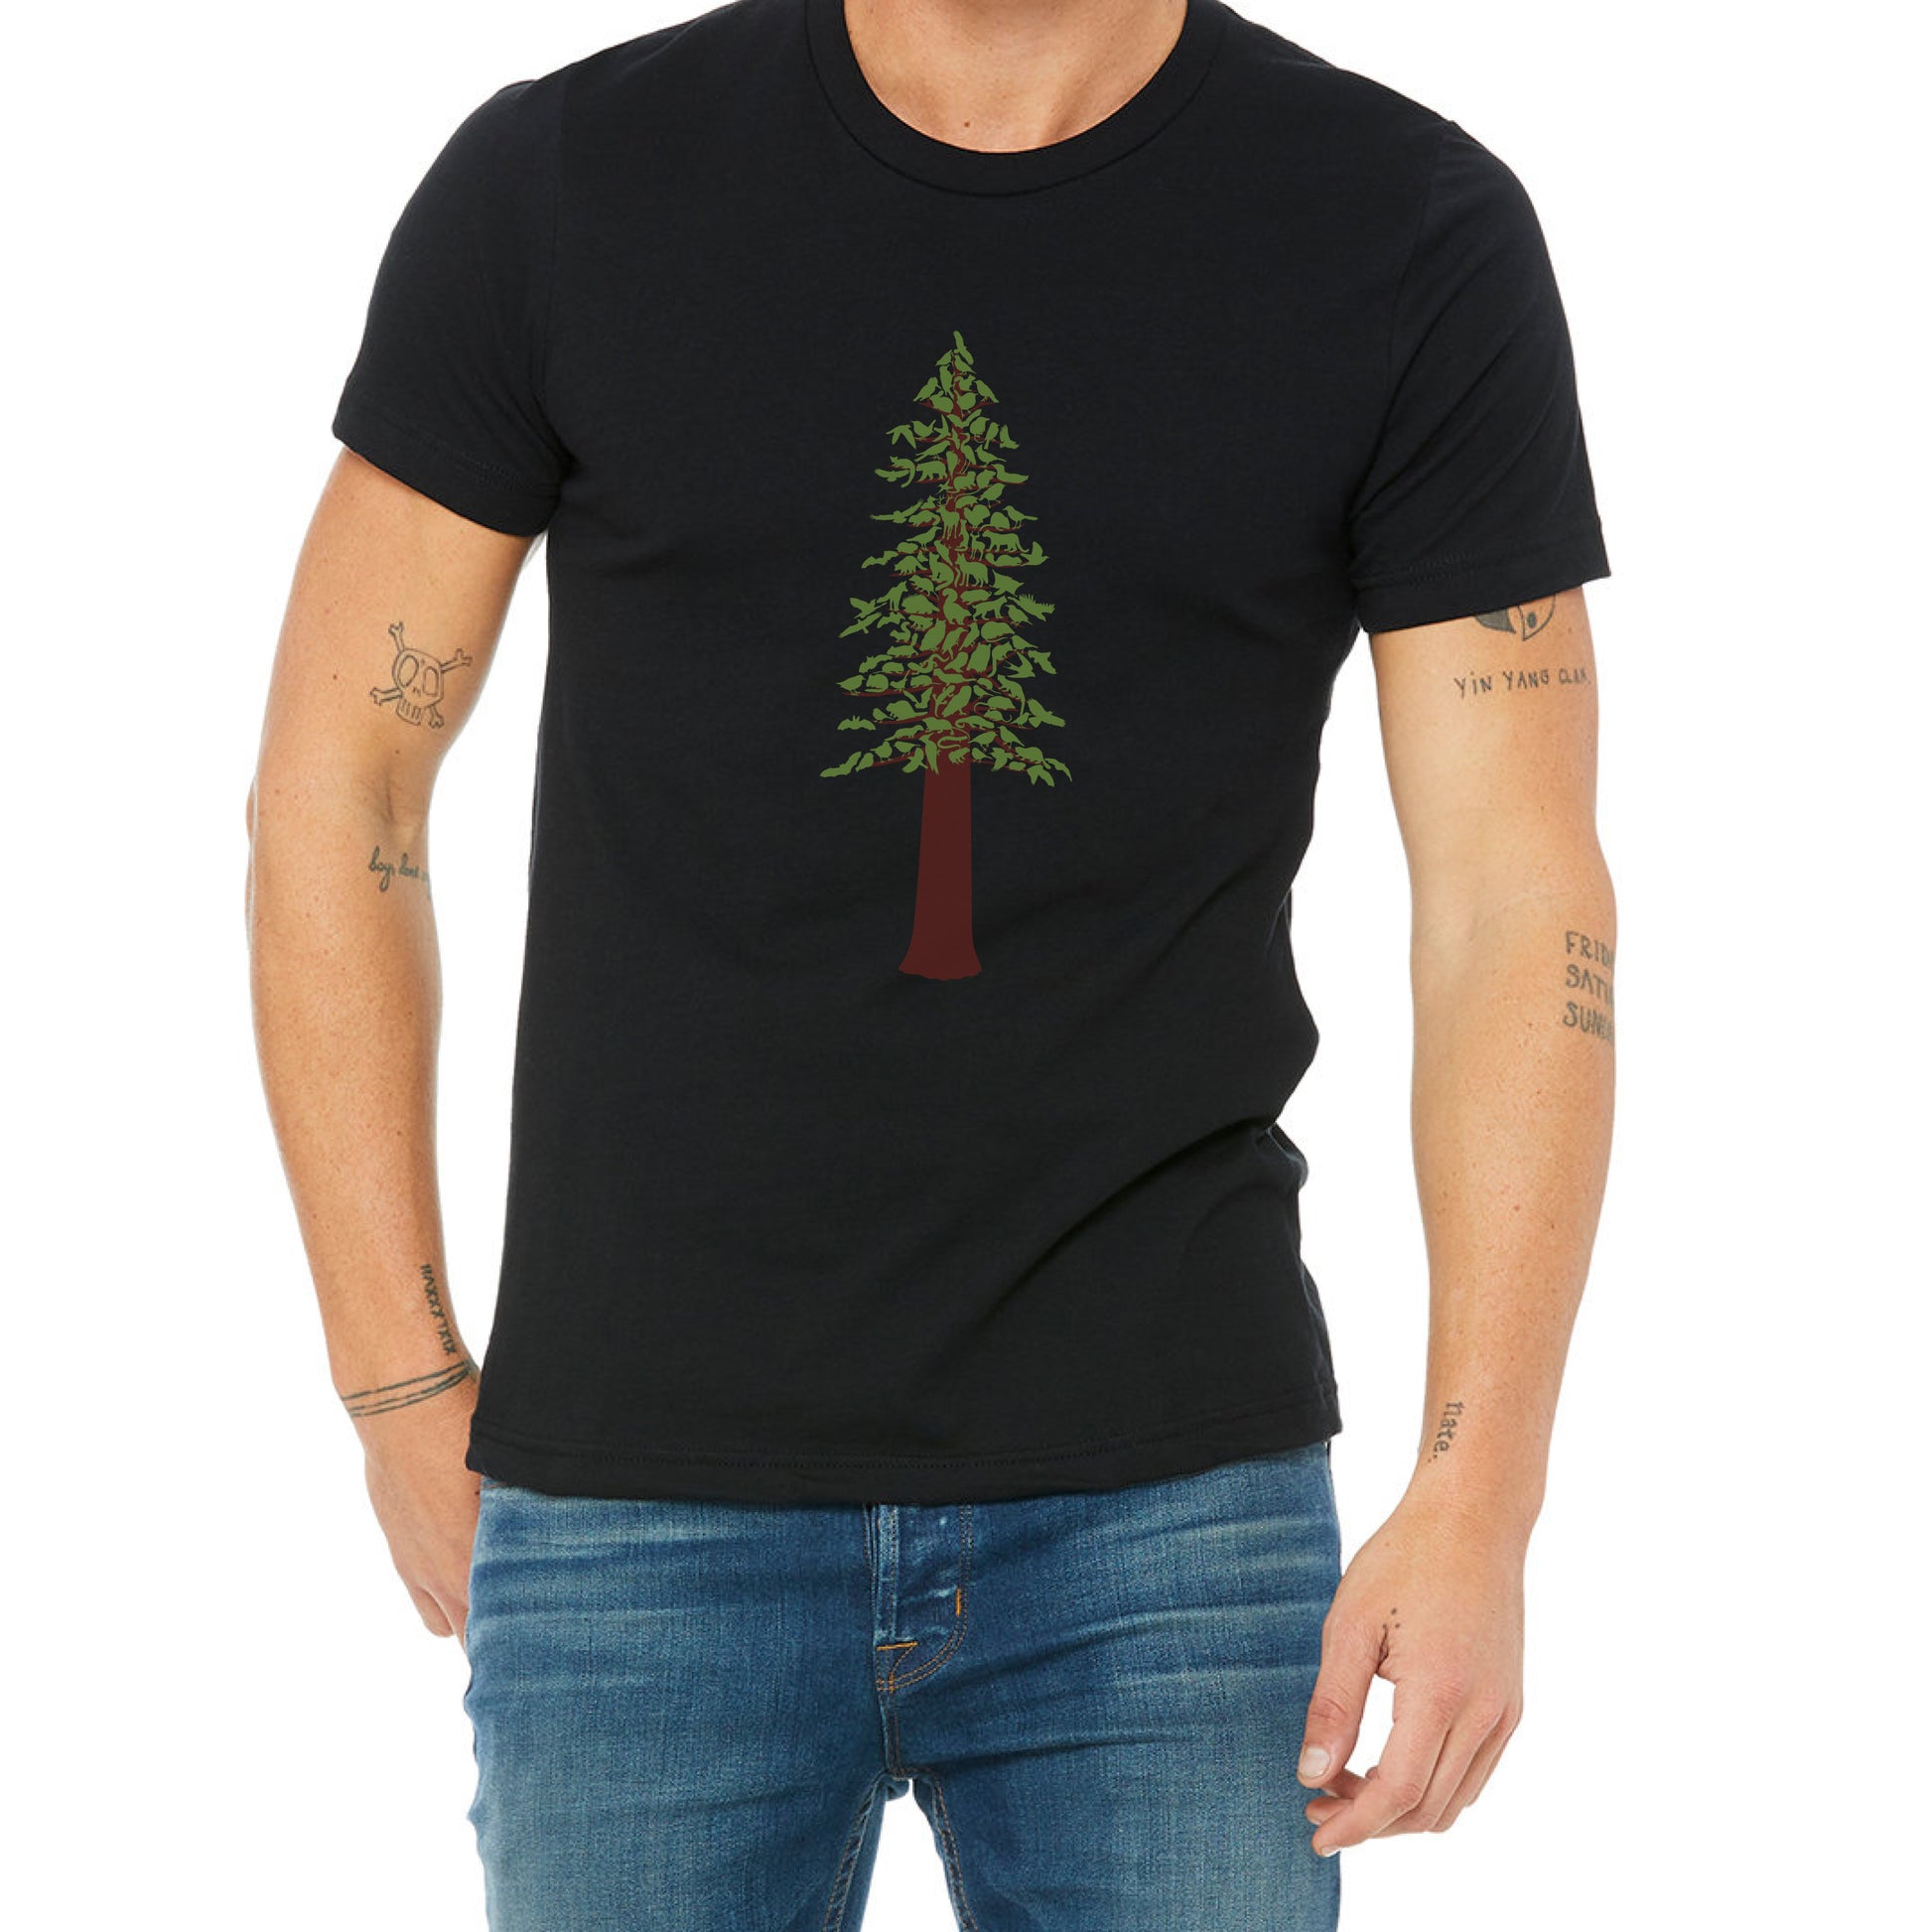 Redwood Forest Tree T-shirt - Alice Frost Studio